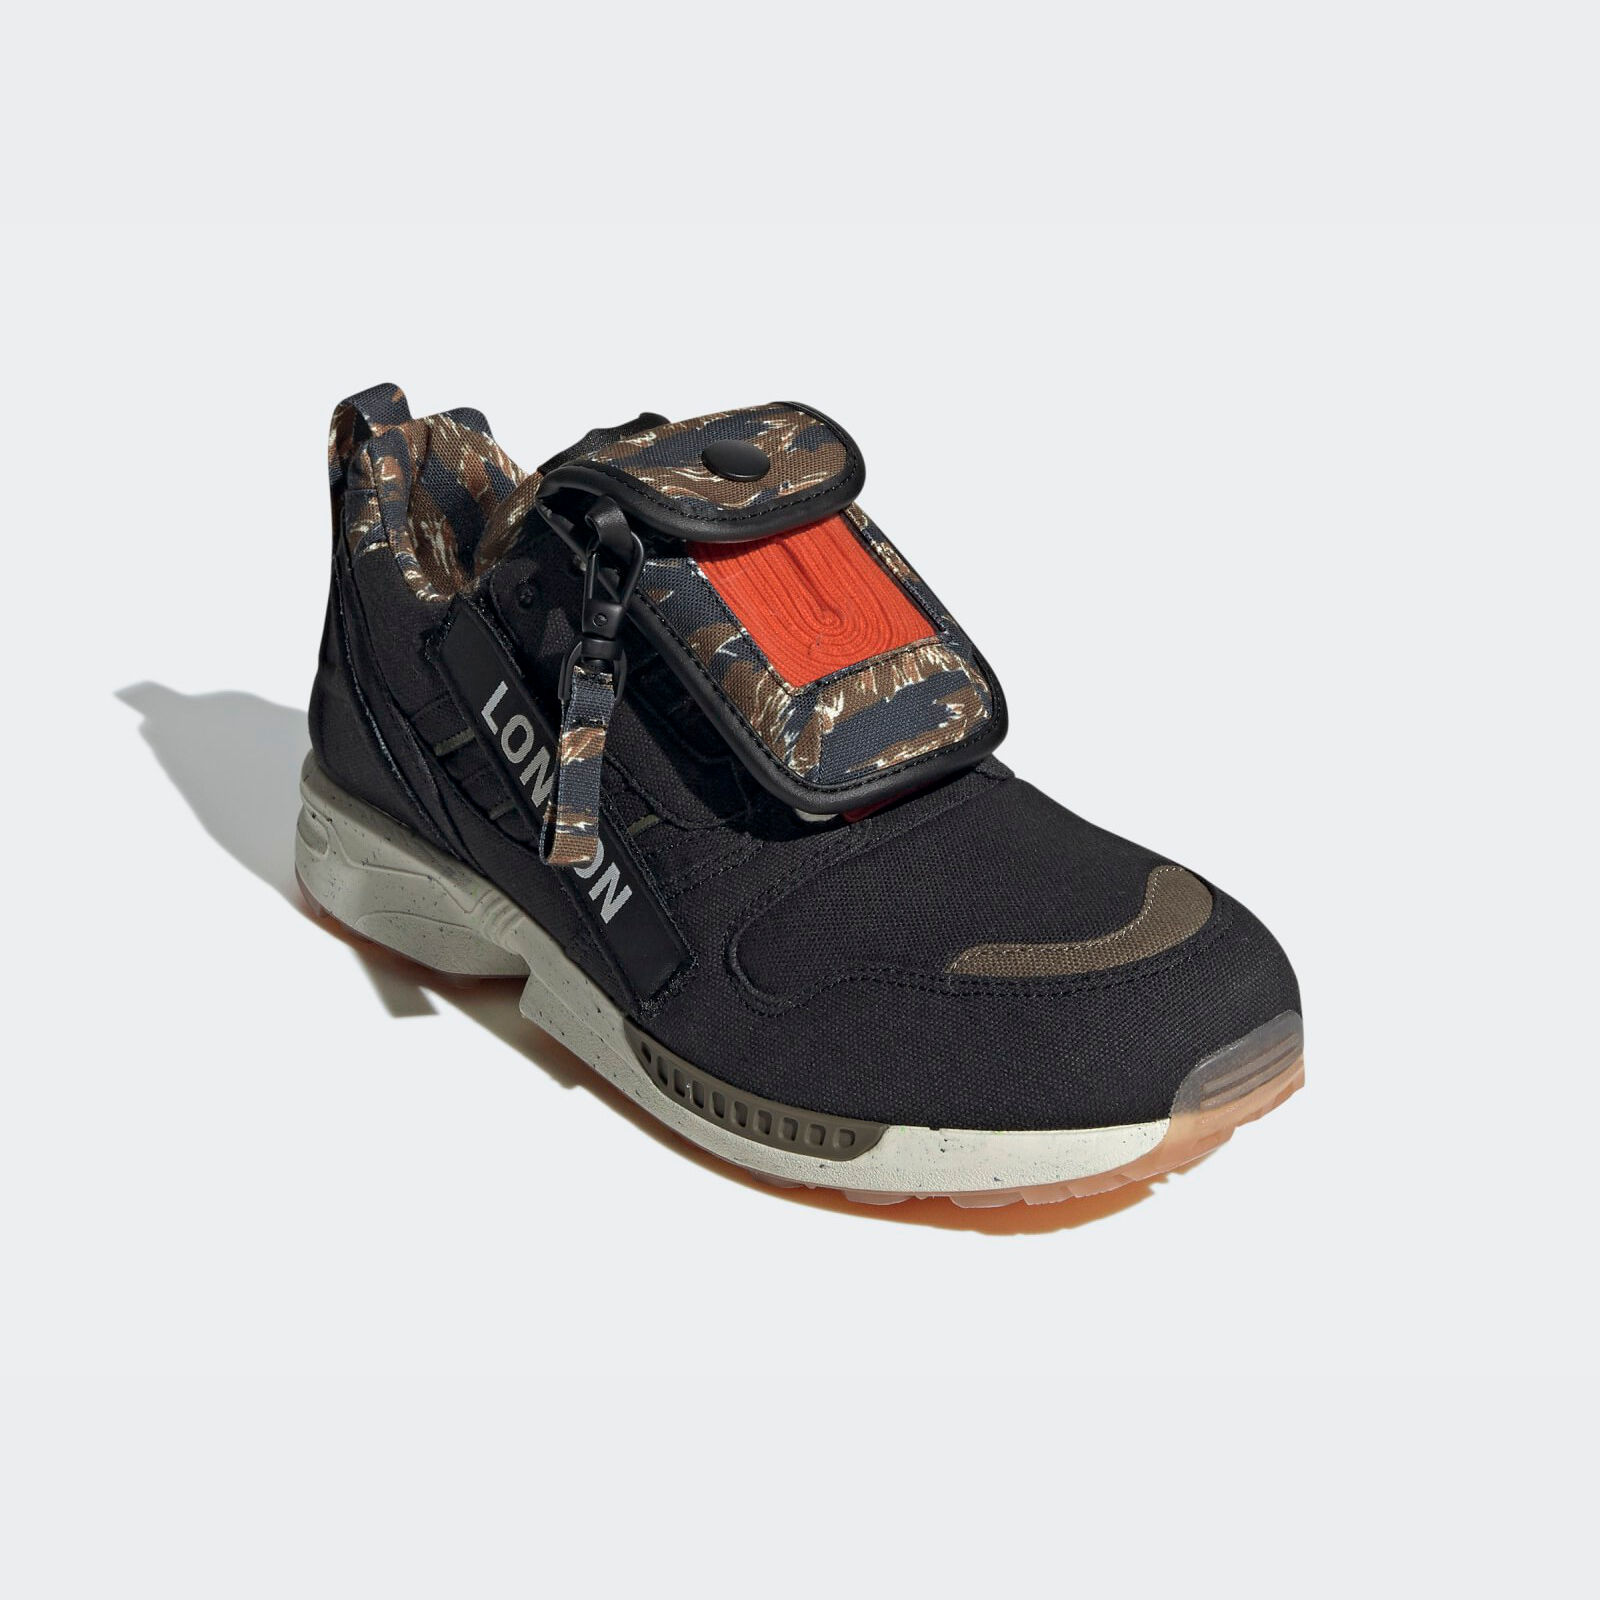 Adidas x Out There
ZX 8000
Black / Orange